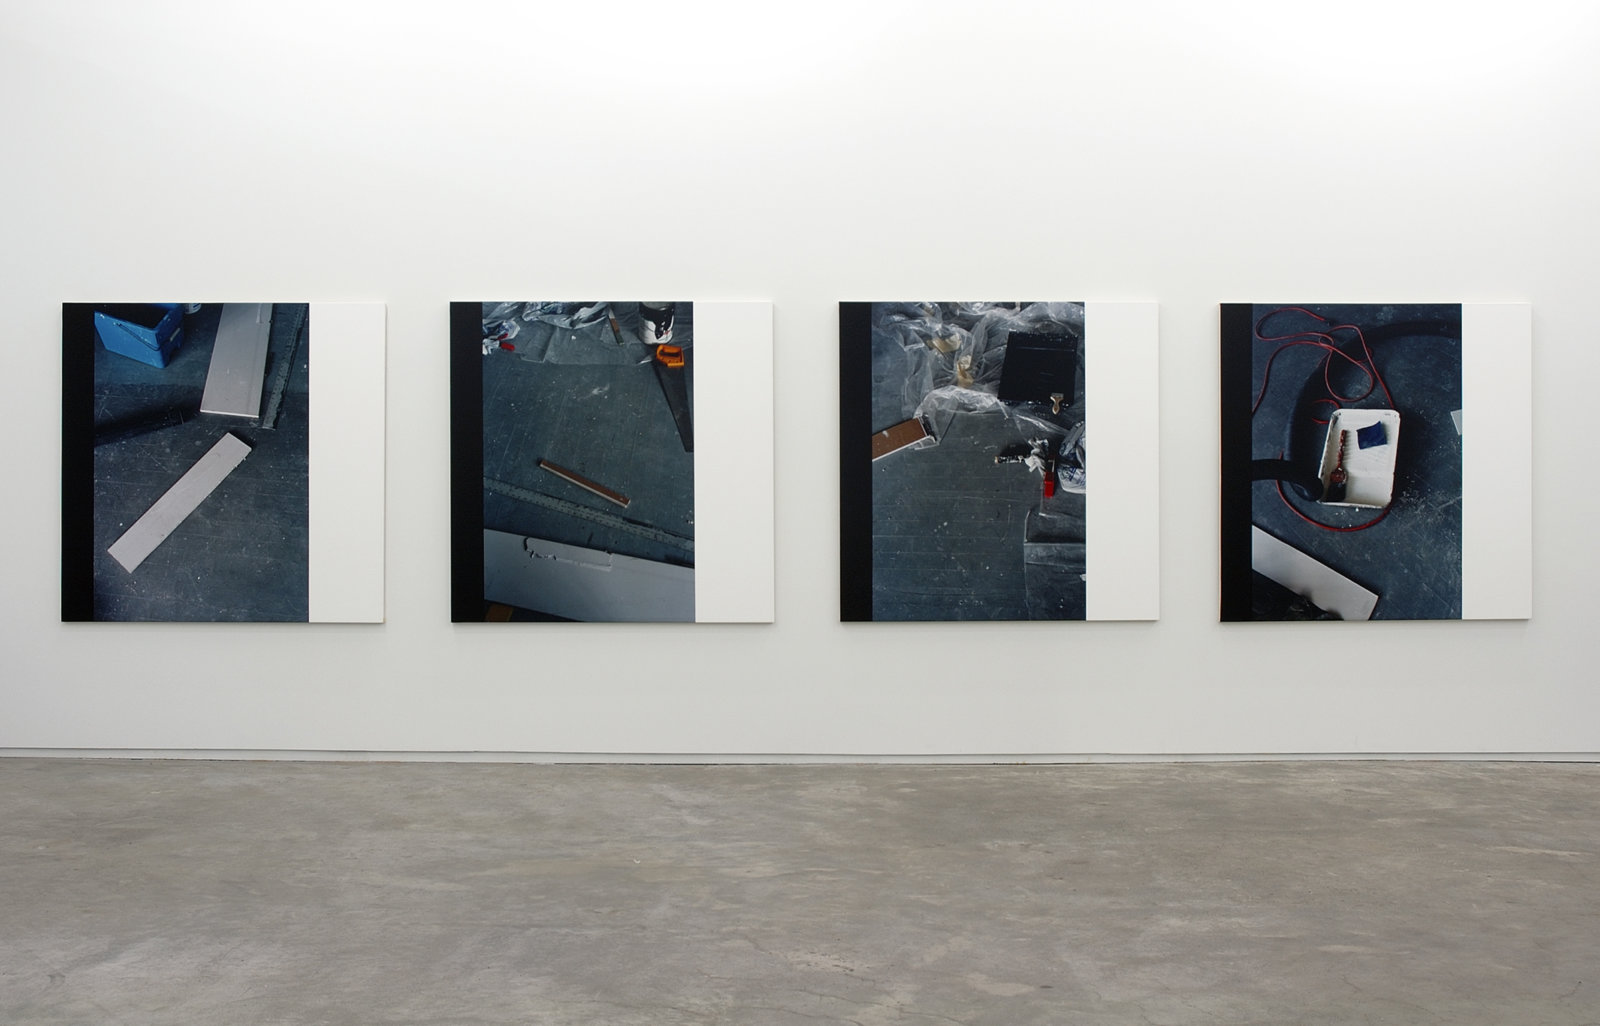 Ian Wallace, Constellations (With Black) I, II, III, IV, 2006, photolaminate with acrylic on canvas, 60 x 60 in. (153 x 153 cm)